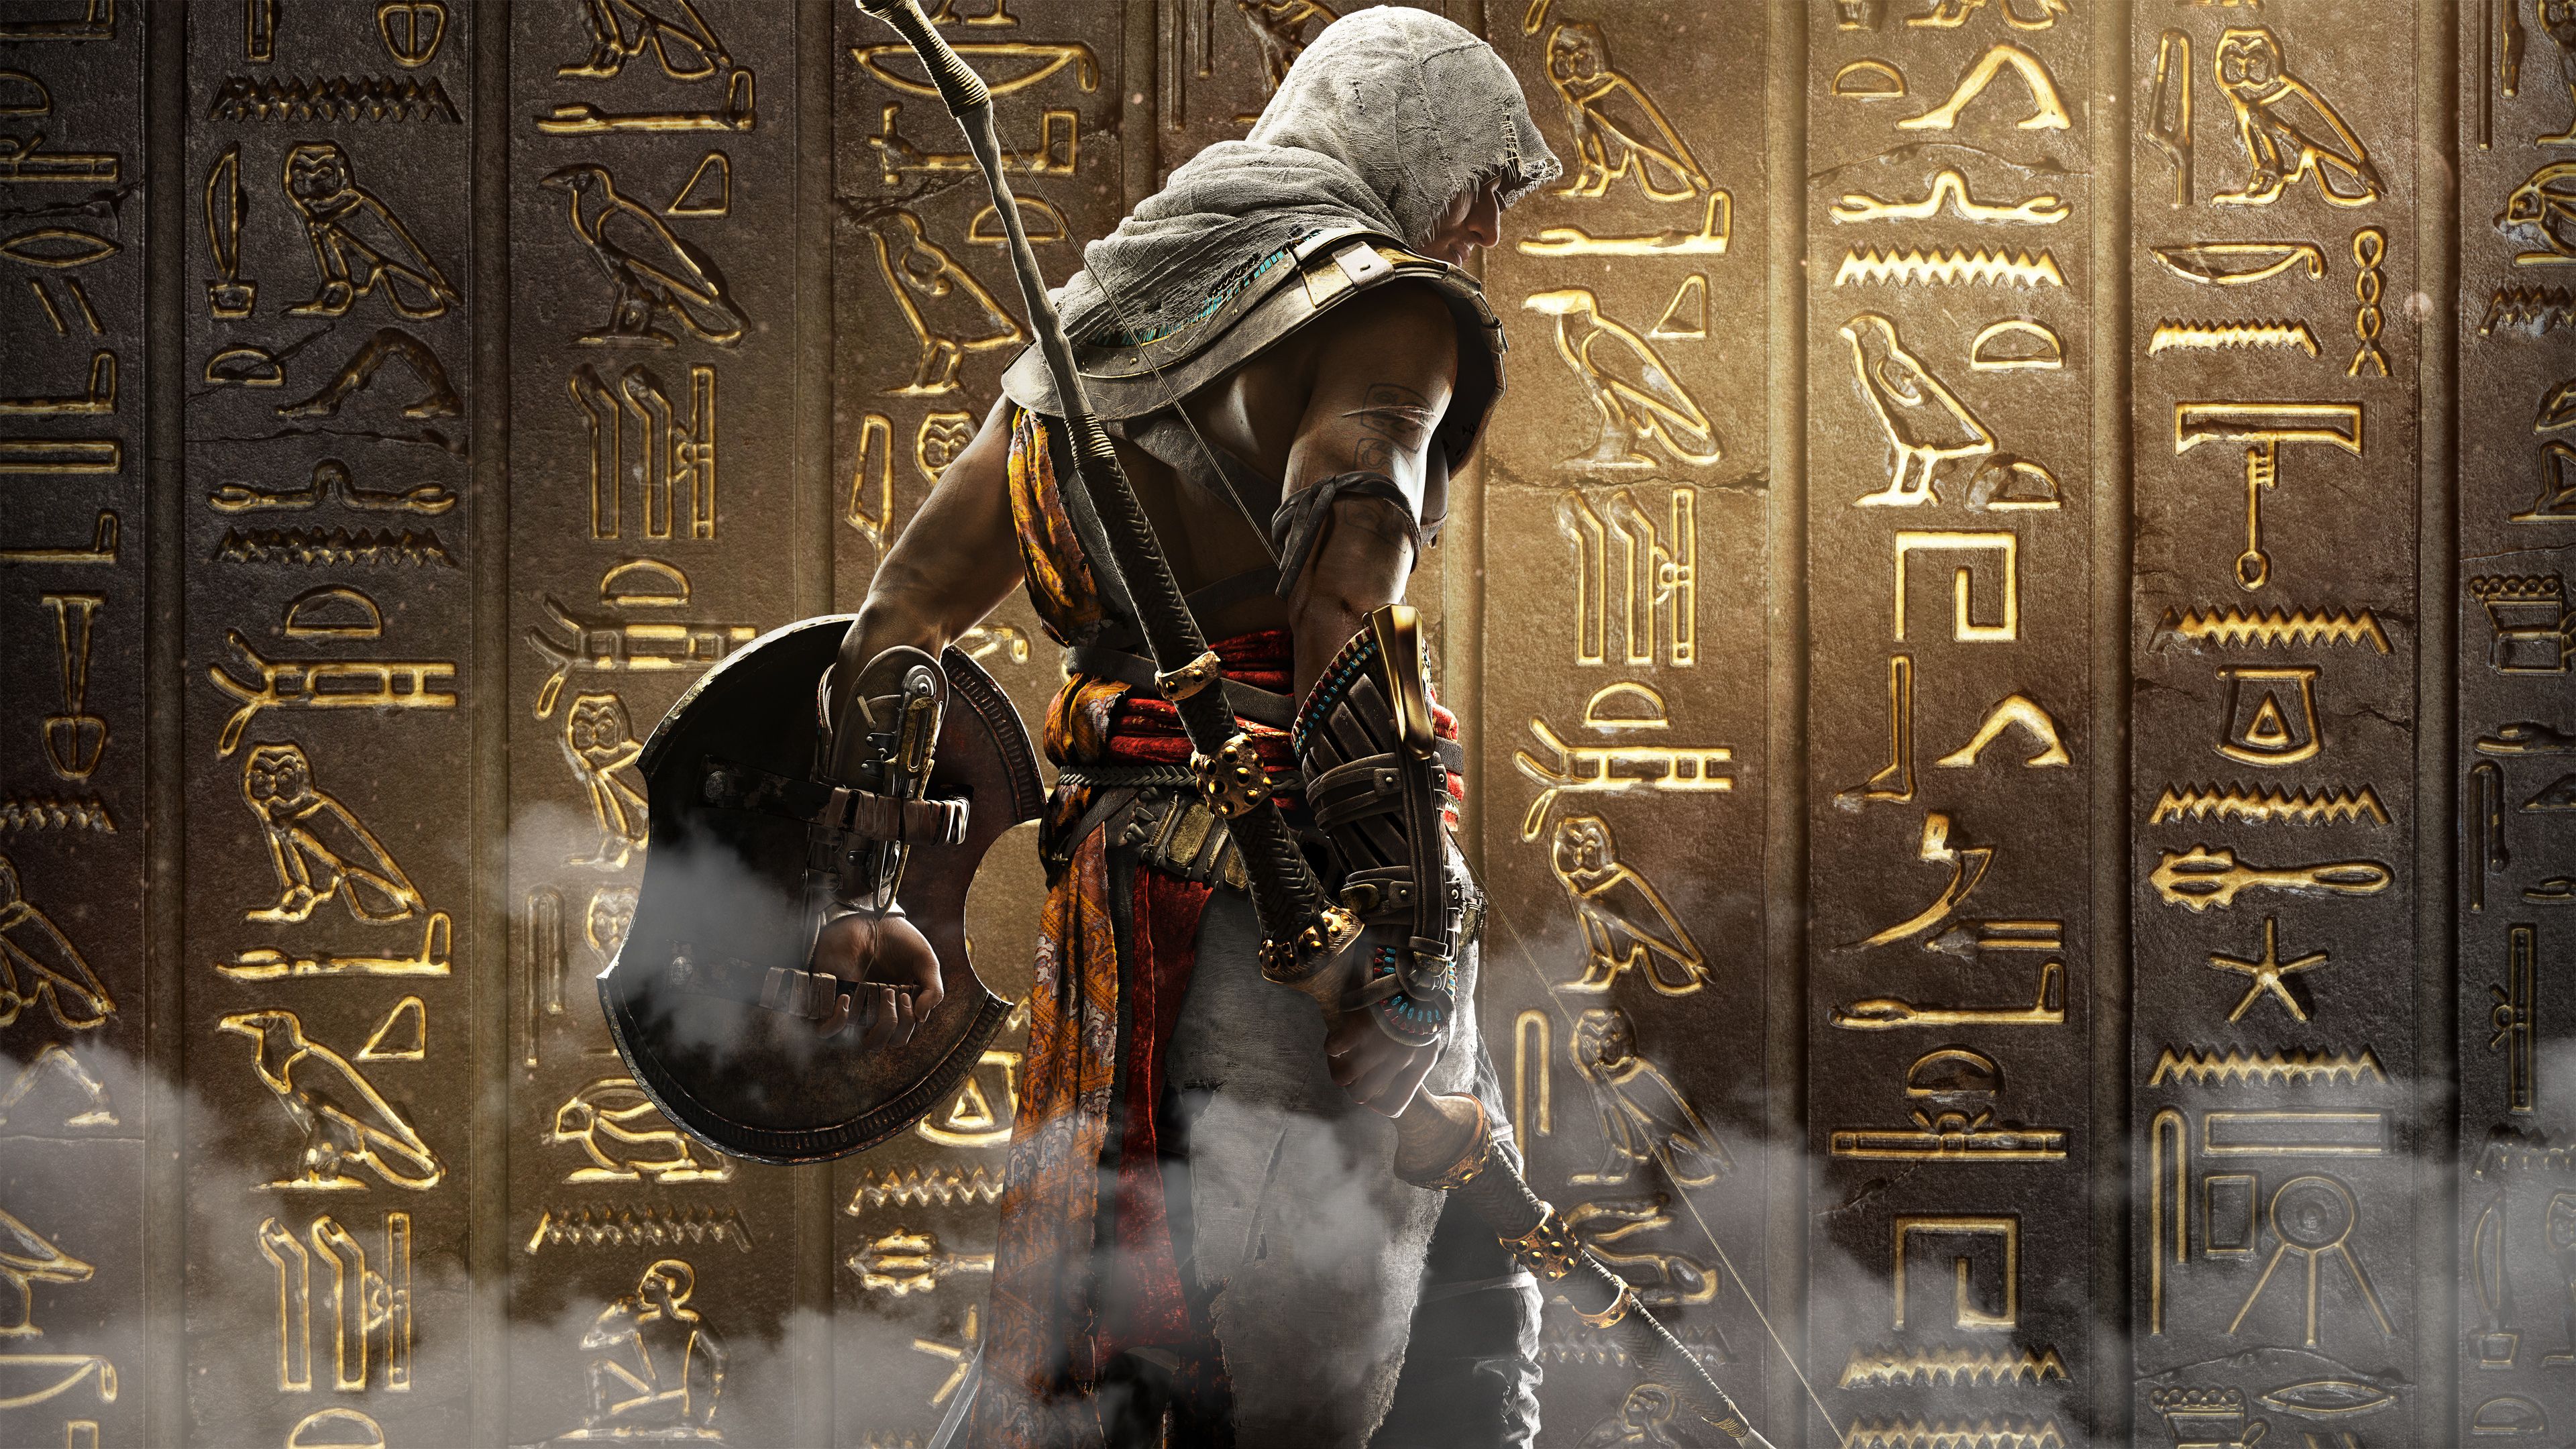 Download 8 Bayek Wallpaper. Wallpaper for iPhone, Android